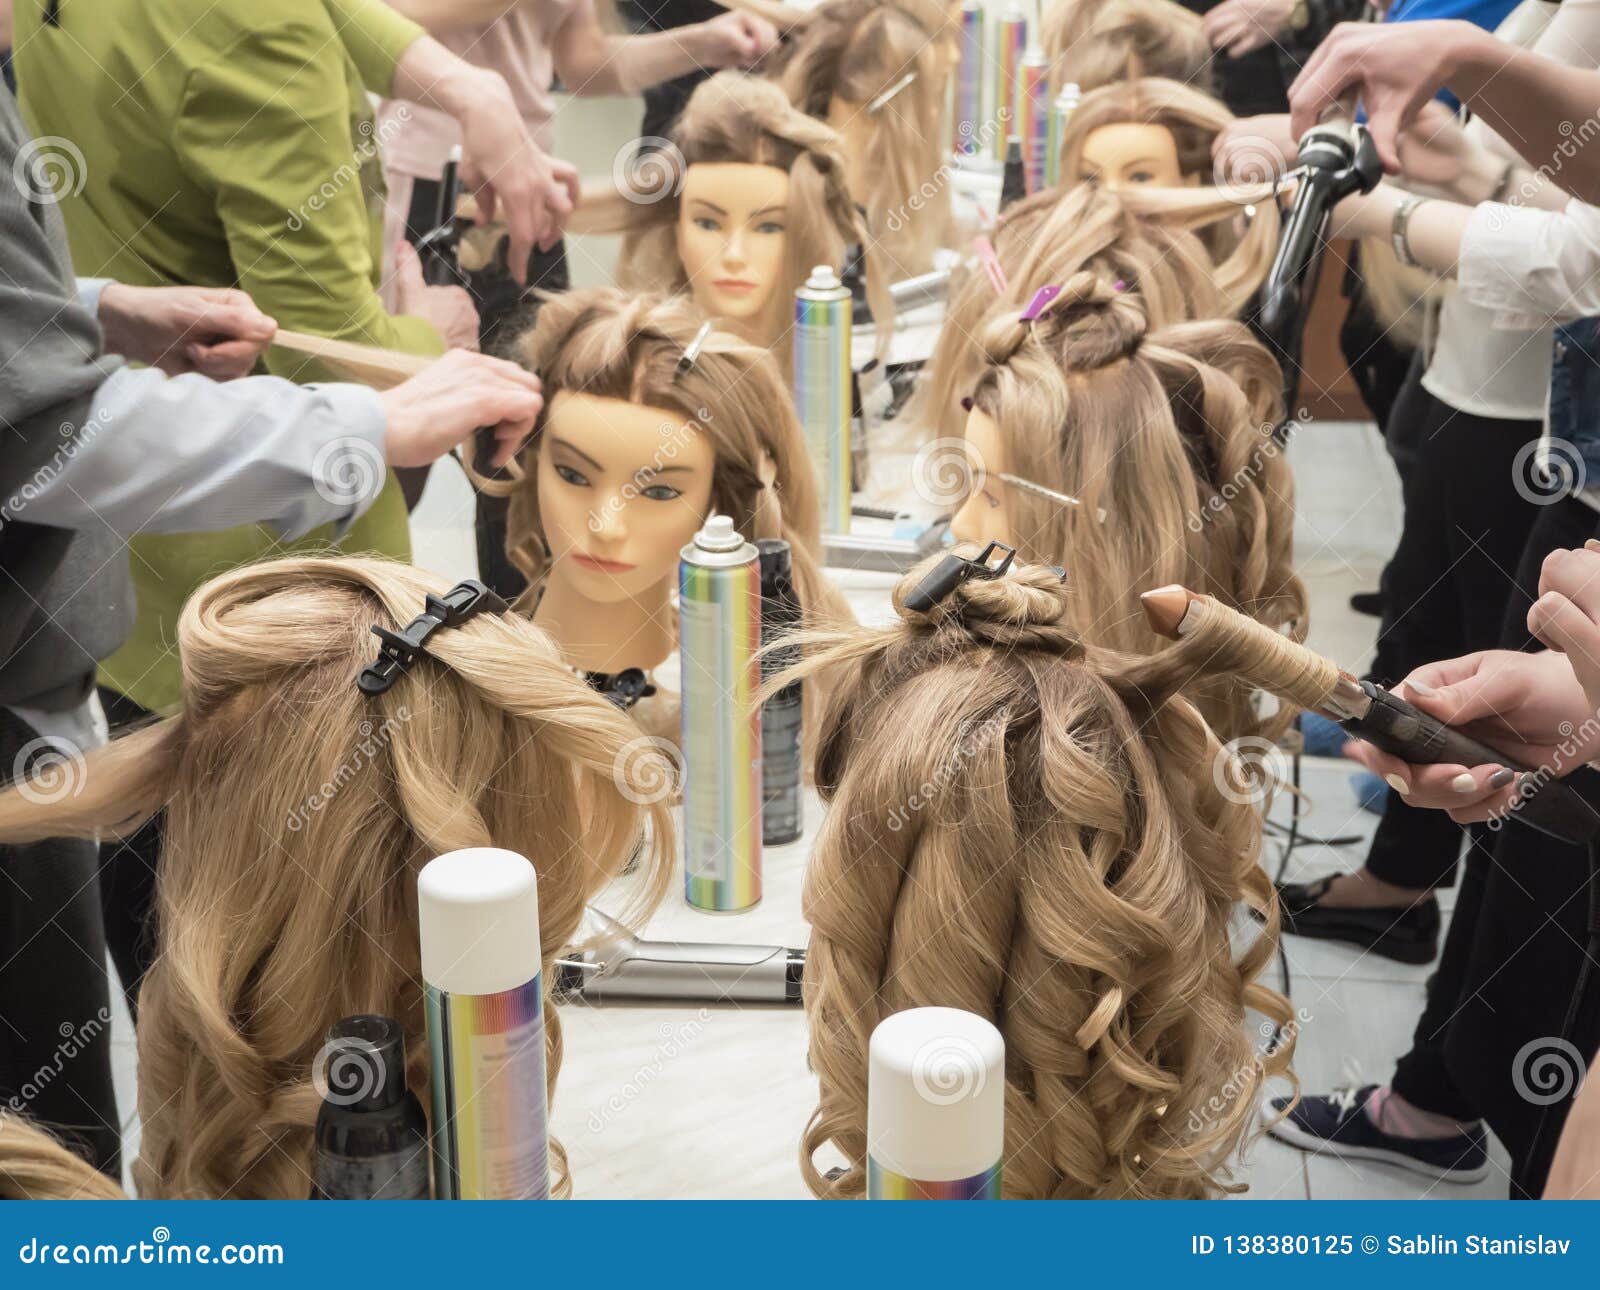 Training Hairstyles On The Mannequin Teamwork Stock Image